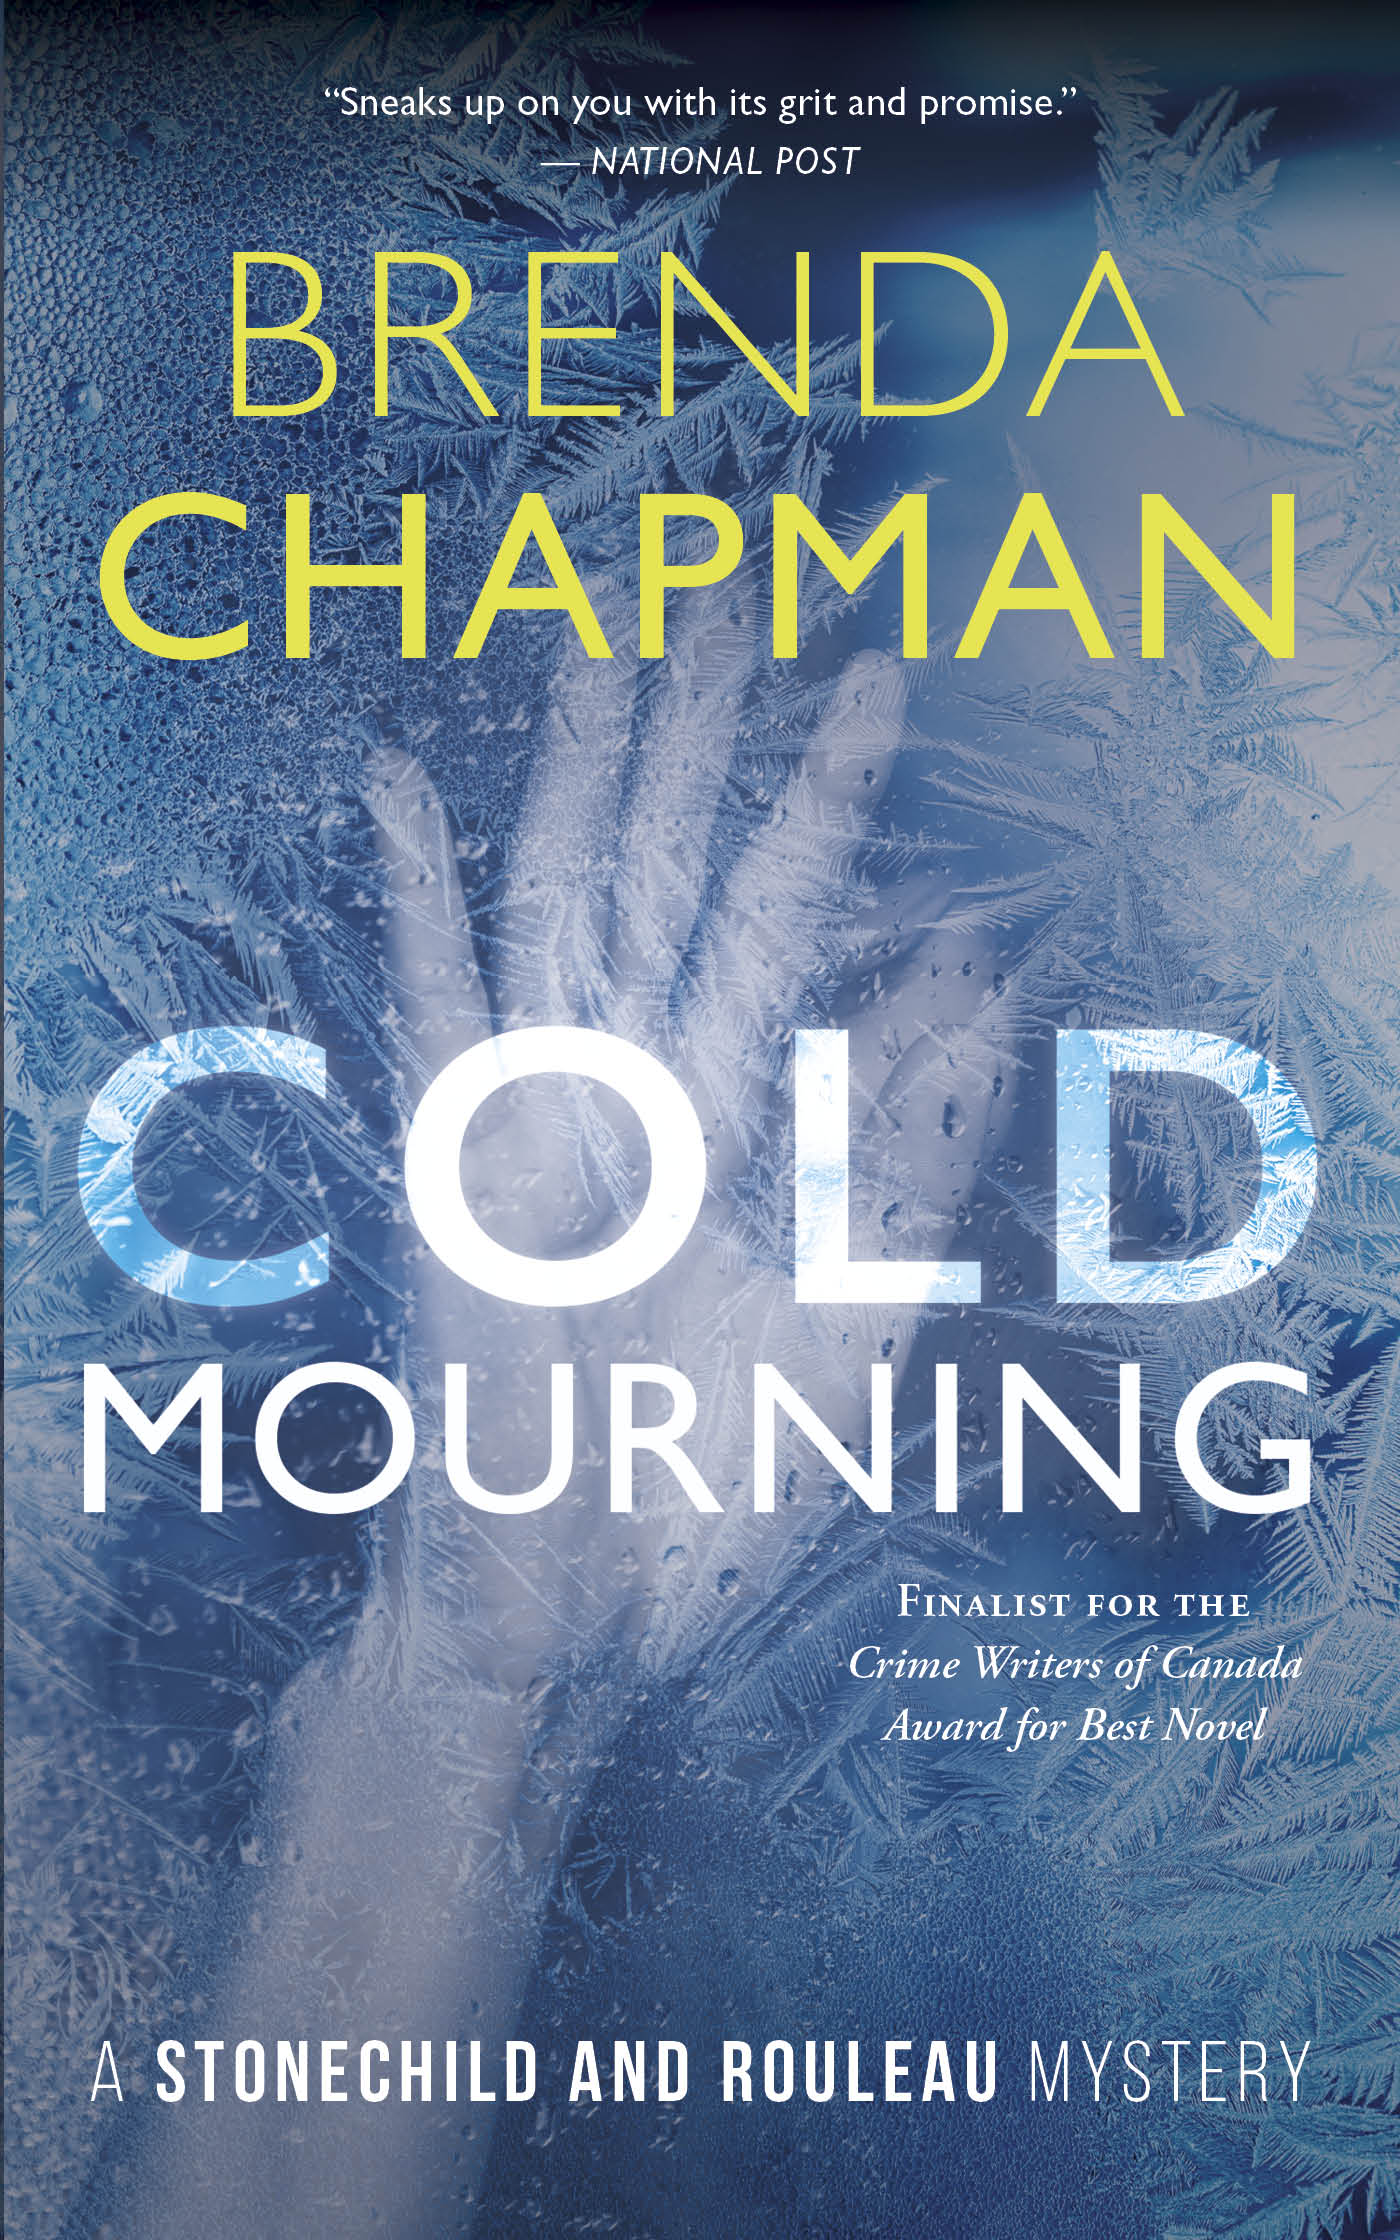 The book cover for Brenda's novel Cold Mourning featuring a hand pressing up against a layer of frost